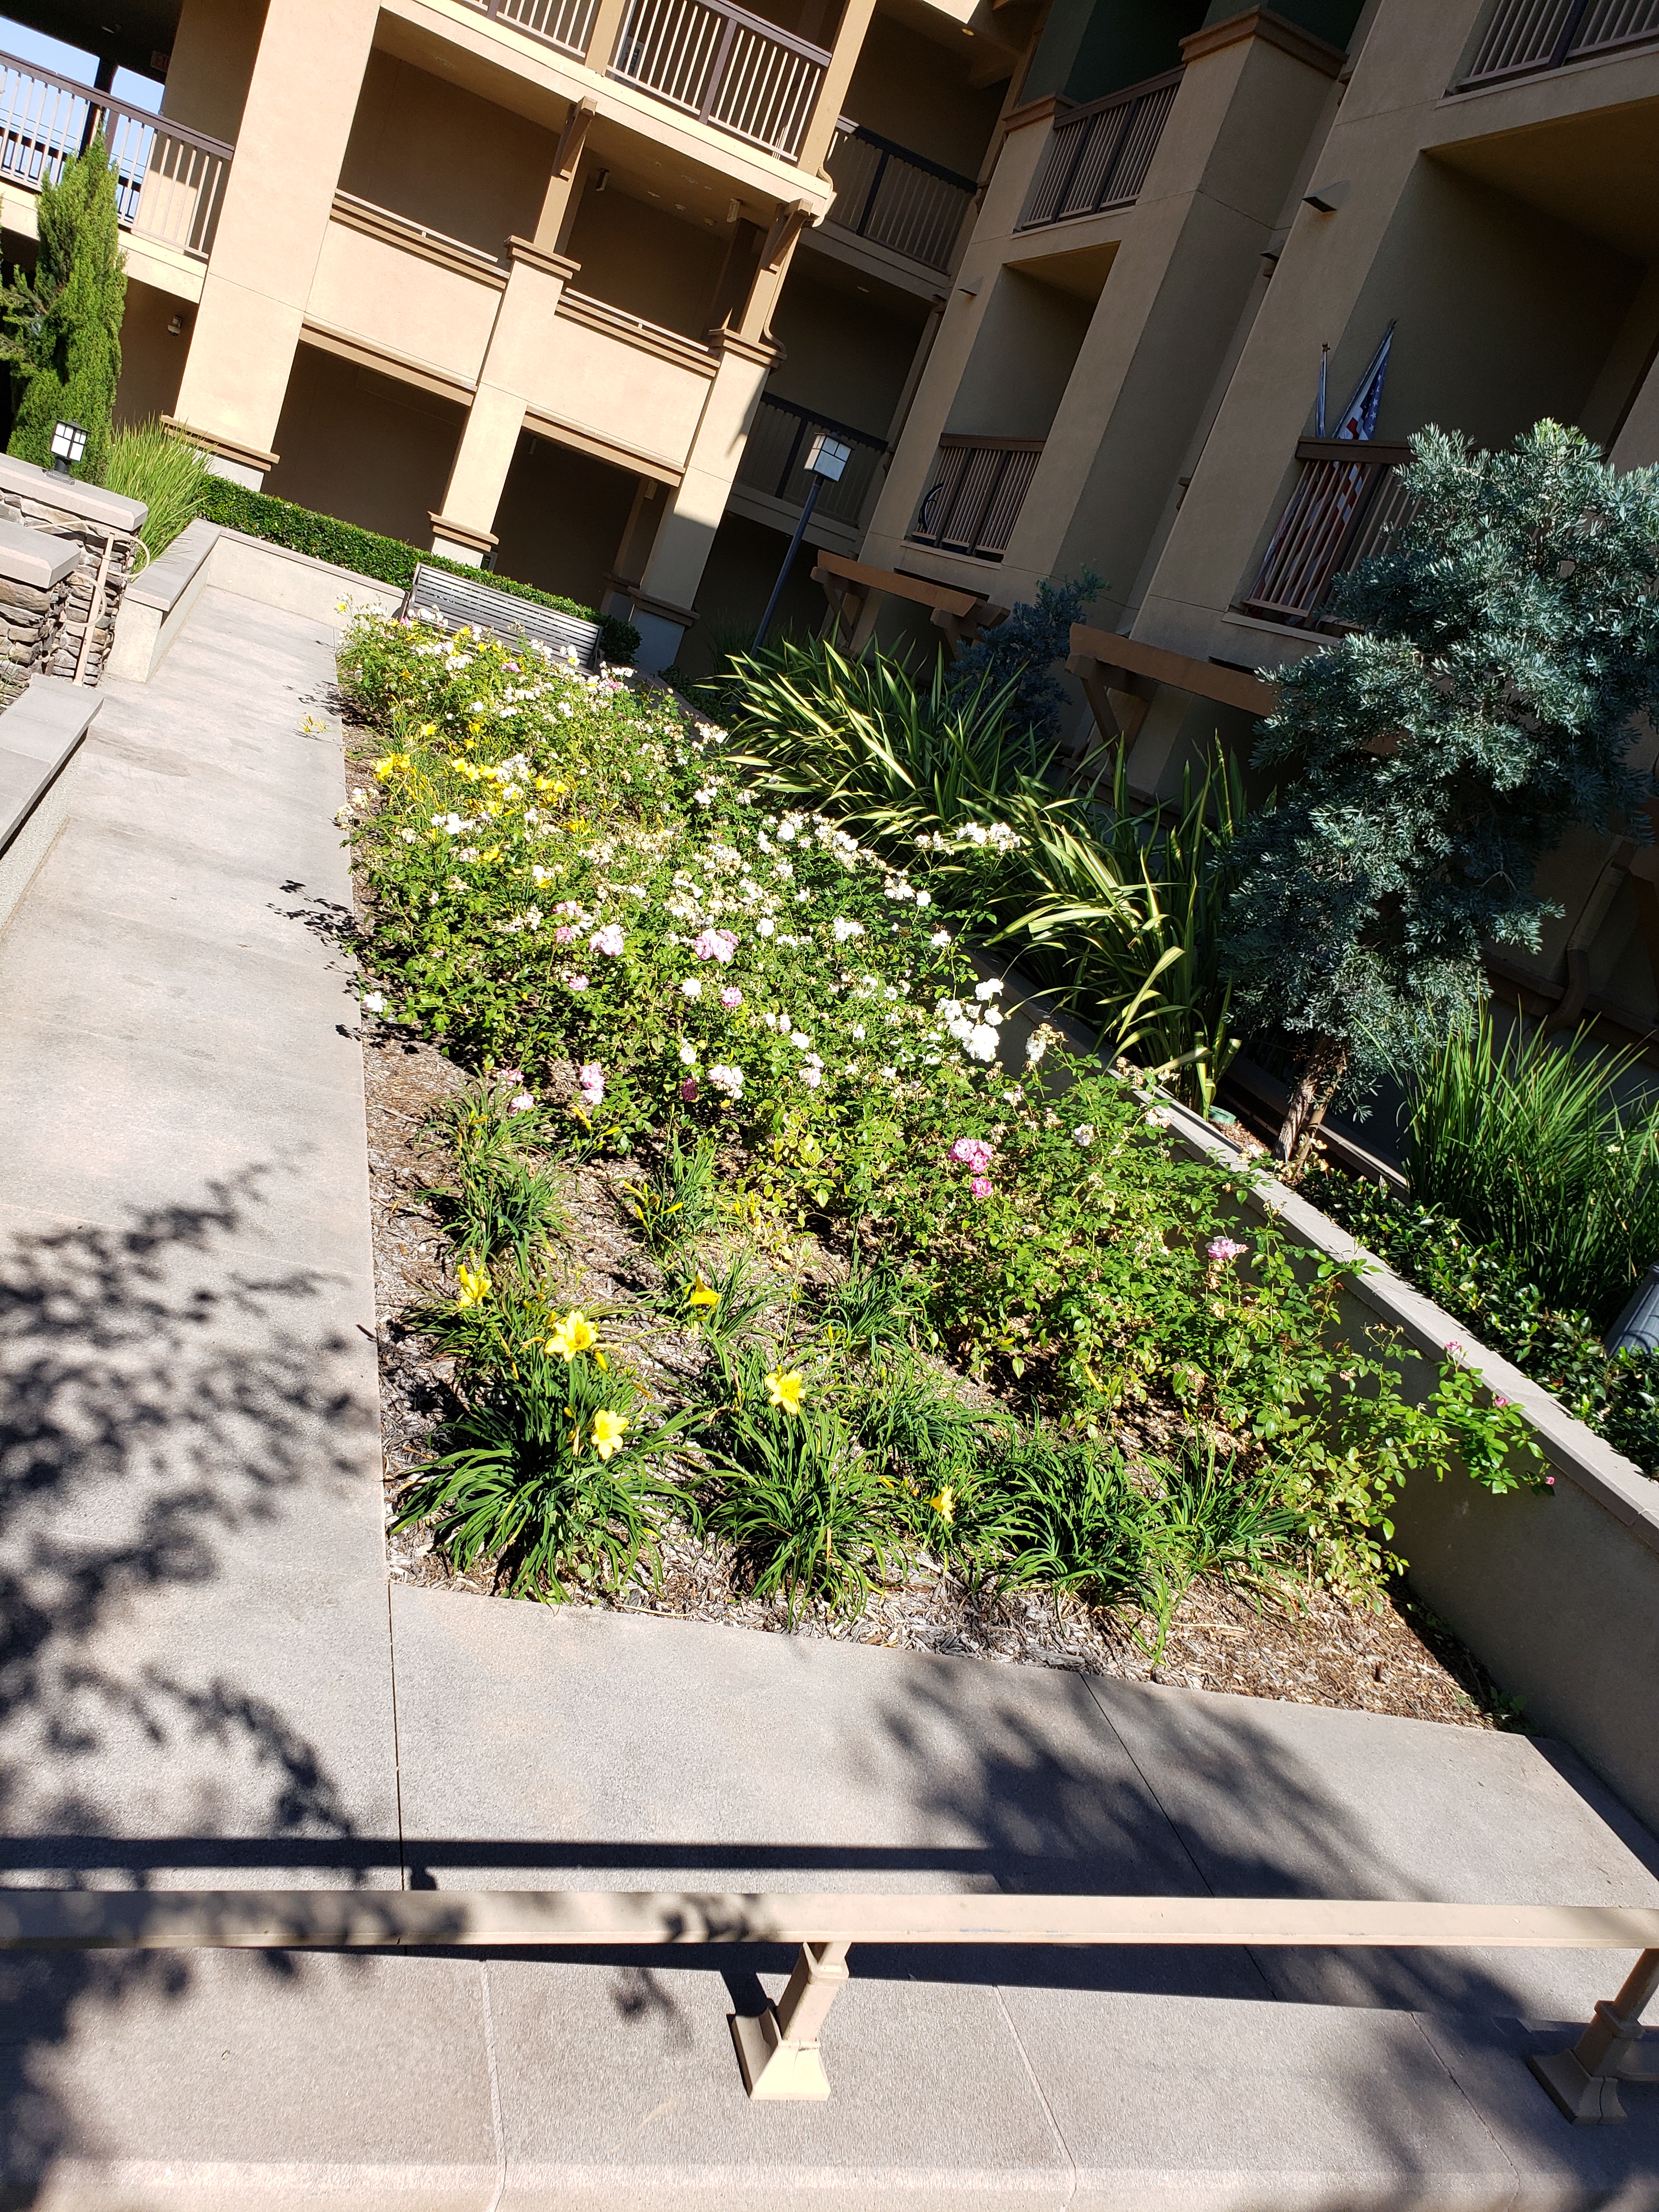 Exterior view of a garden area at Broadway Villas - flowerbed in front of a long concrete planter with shrubs